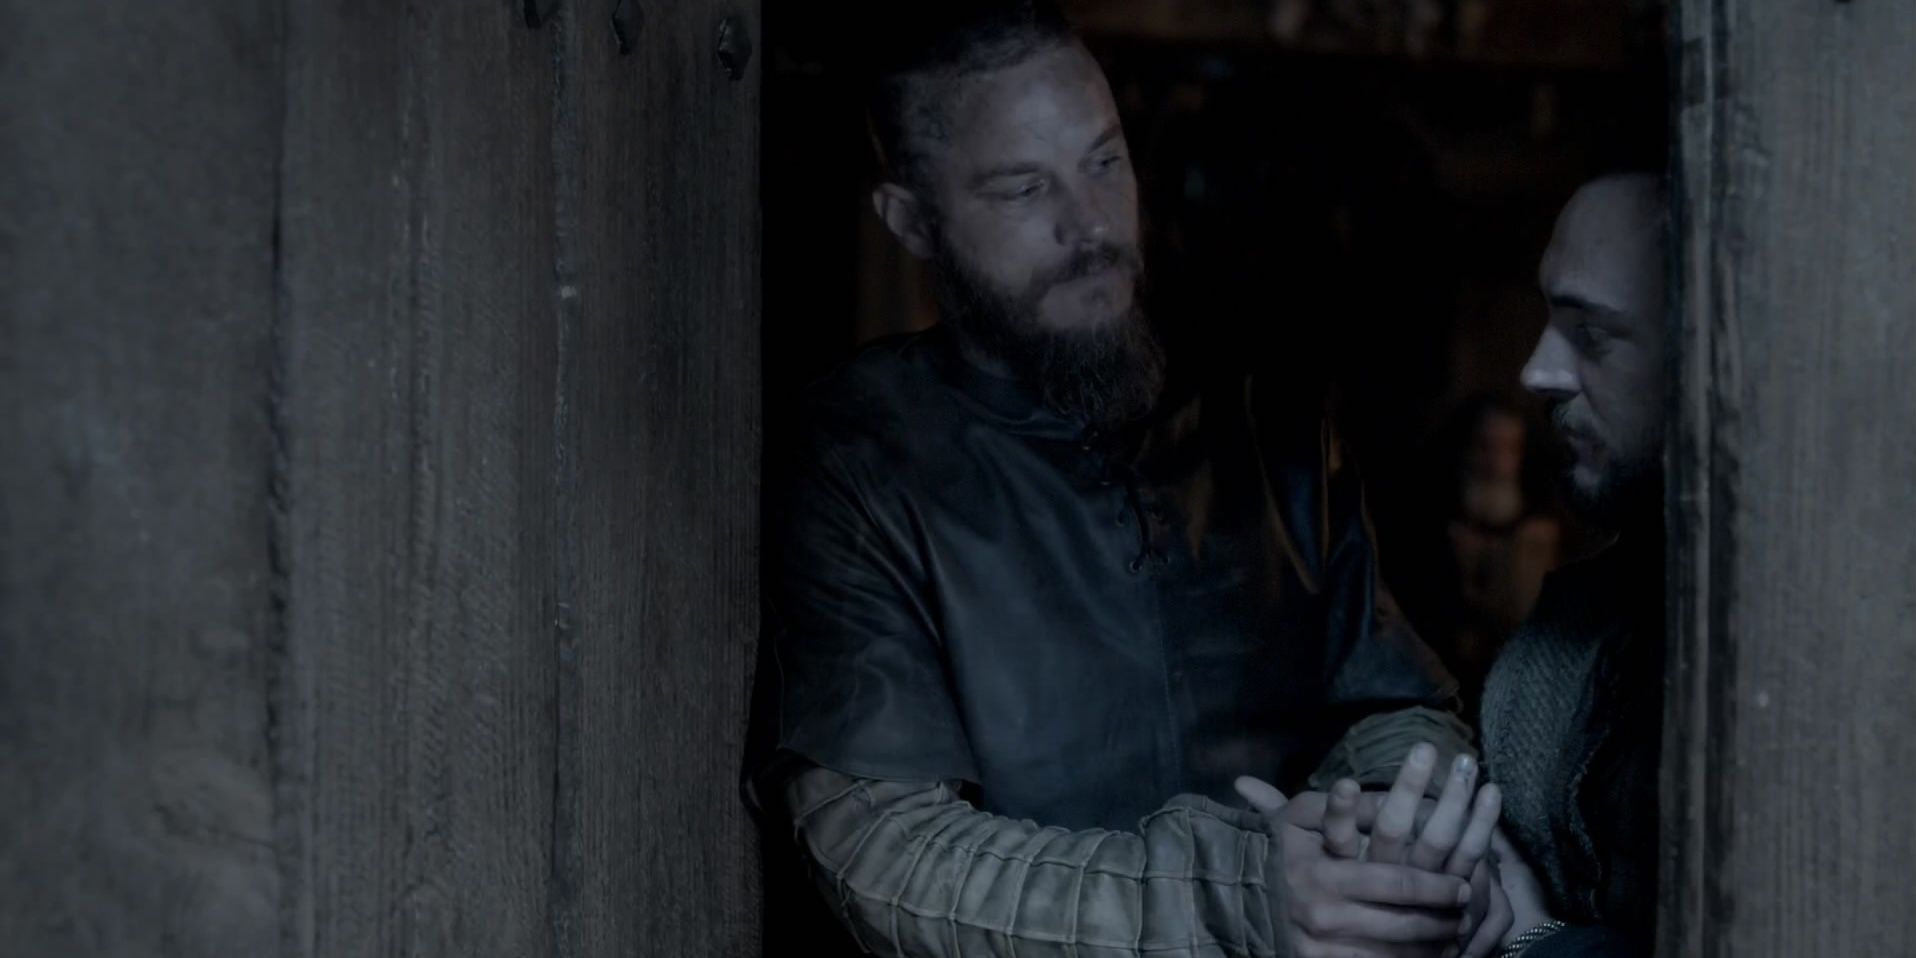 Athelstan reassures a wounded Ragnar that he'll get better in Vikings